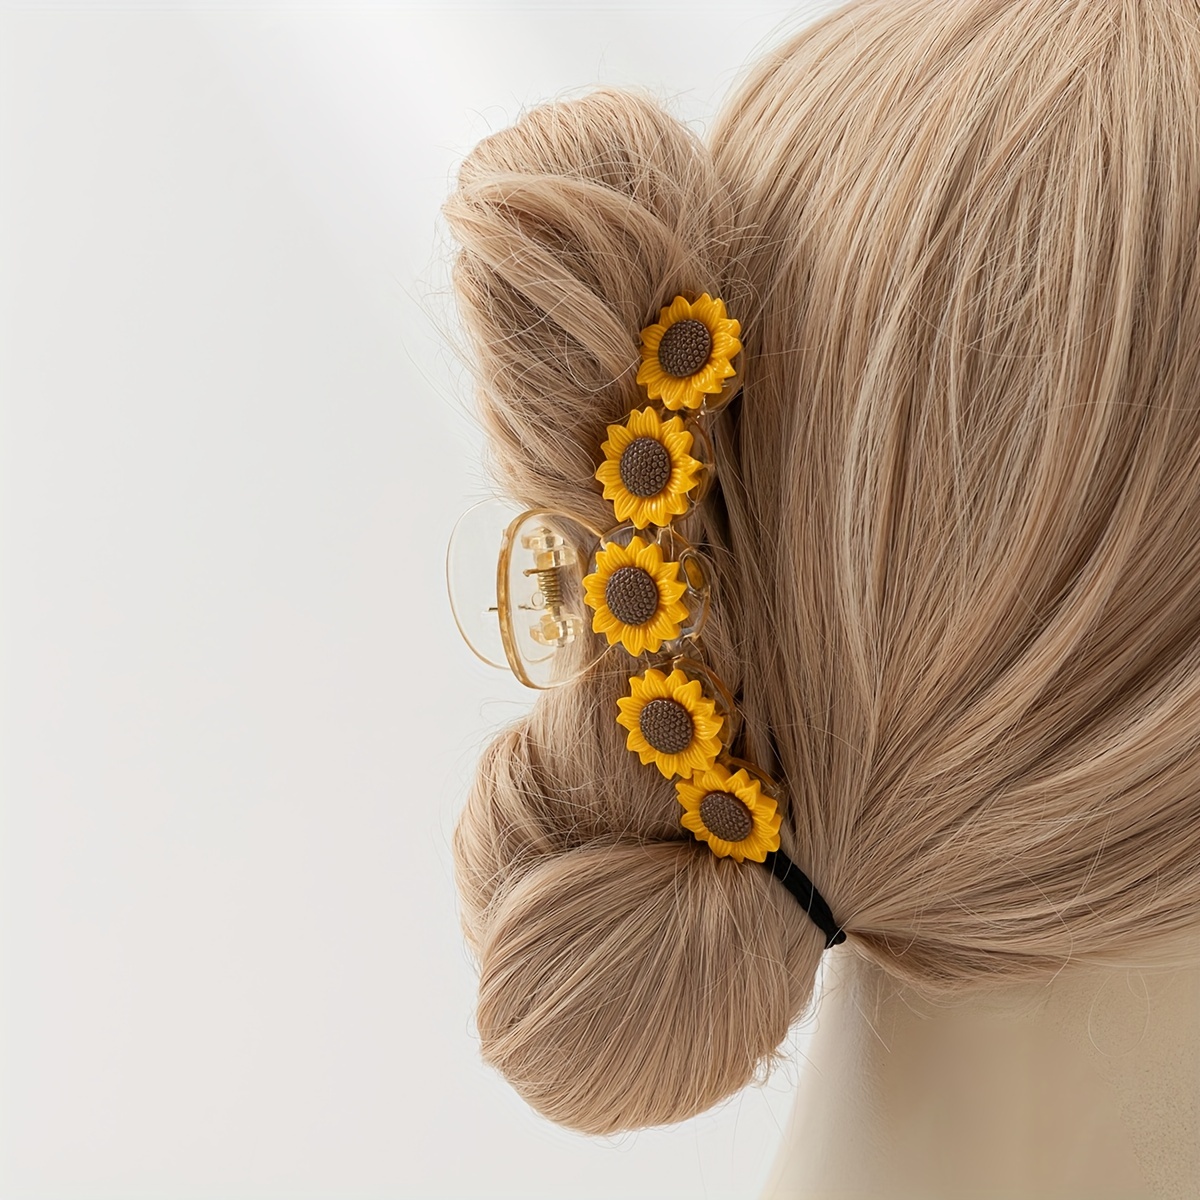 

Sunflower Hair Claw Clip For Women - Sweet Style Large Plastic Sunflower Flower Hair Clamp For Casual And Party Wear, 14+, Single Piece With Color Matching Design